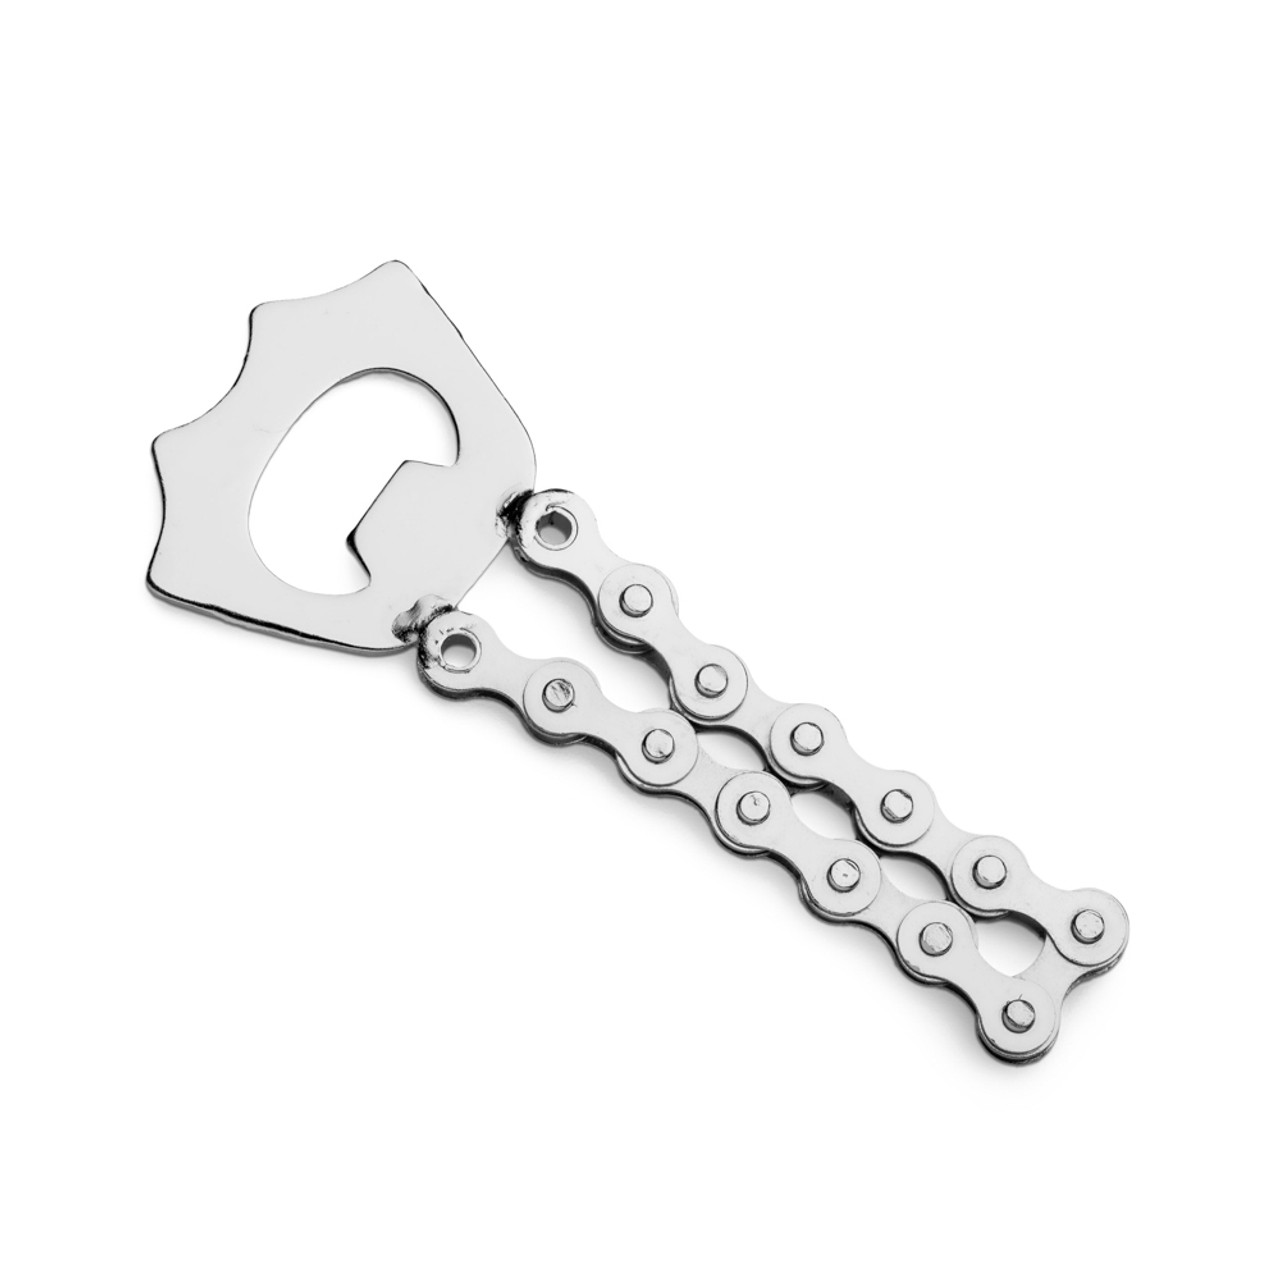 https://cdn11.bigcommerce.com/s-cznxq08r7/images/stencil/1280x1280/products/5281/14639/173431_Recycled_Bicycle_Chain_Metal_Bottle_Opener_1__96457.1658254935.jpg?c=1